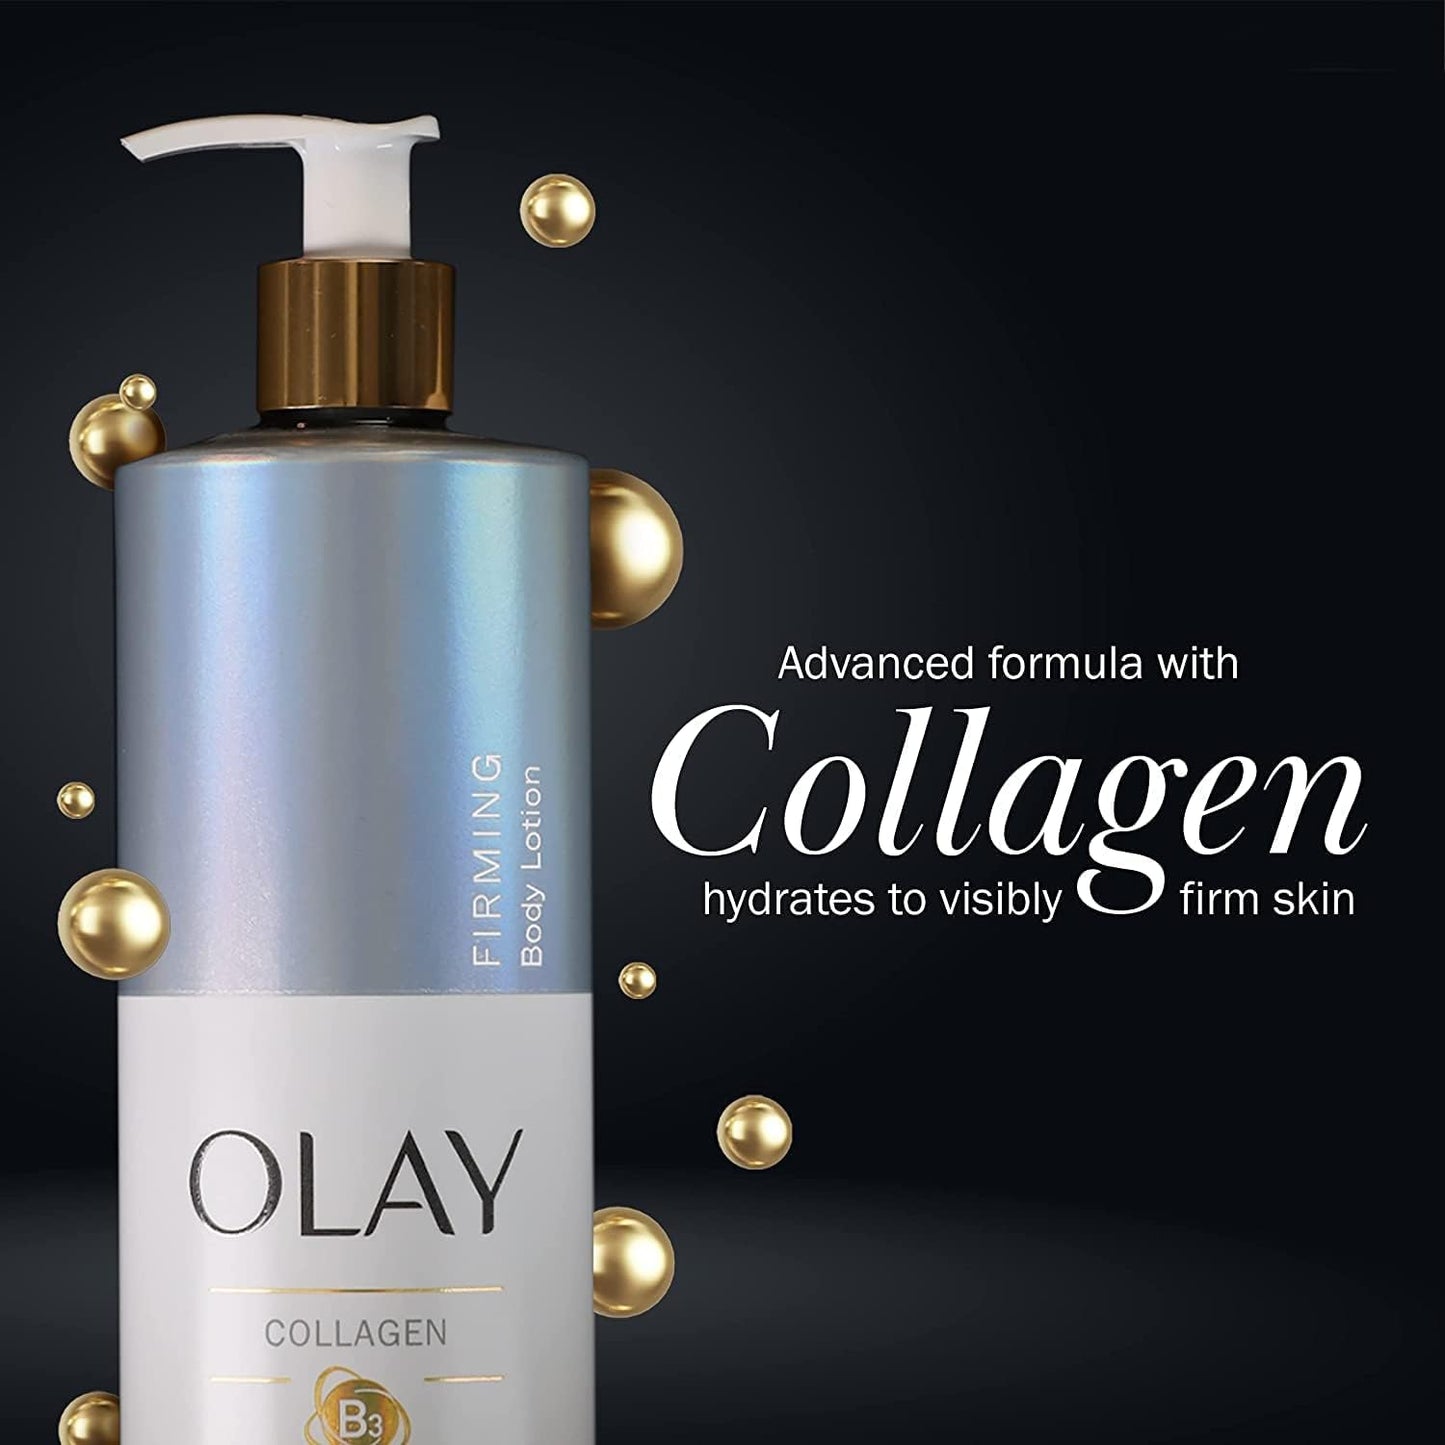 Olay Firming & Hydrating Body Lotion with Collagen, 17 fl oz Pump, Pack of 4